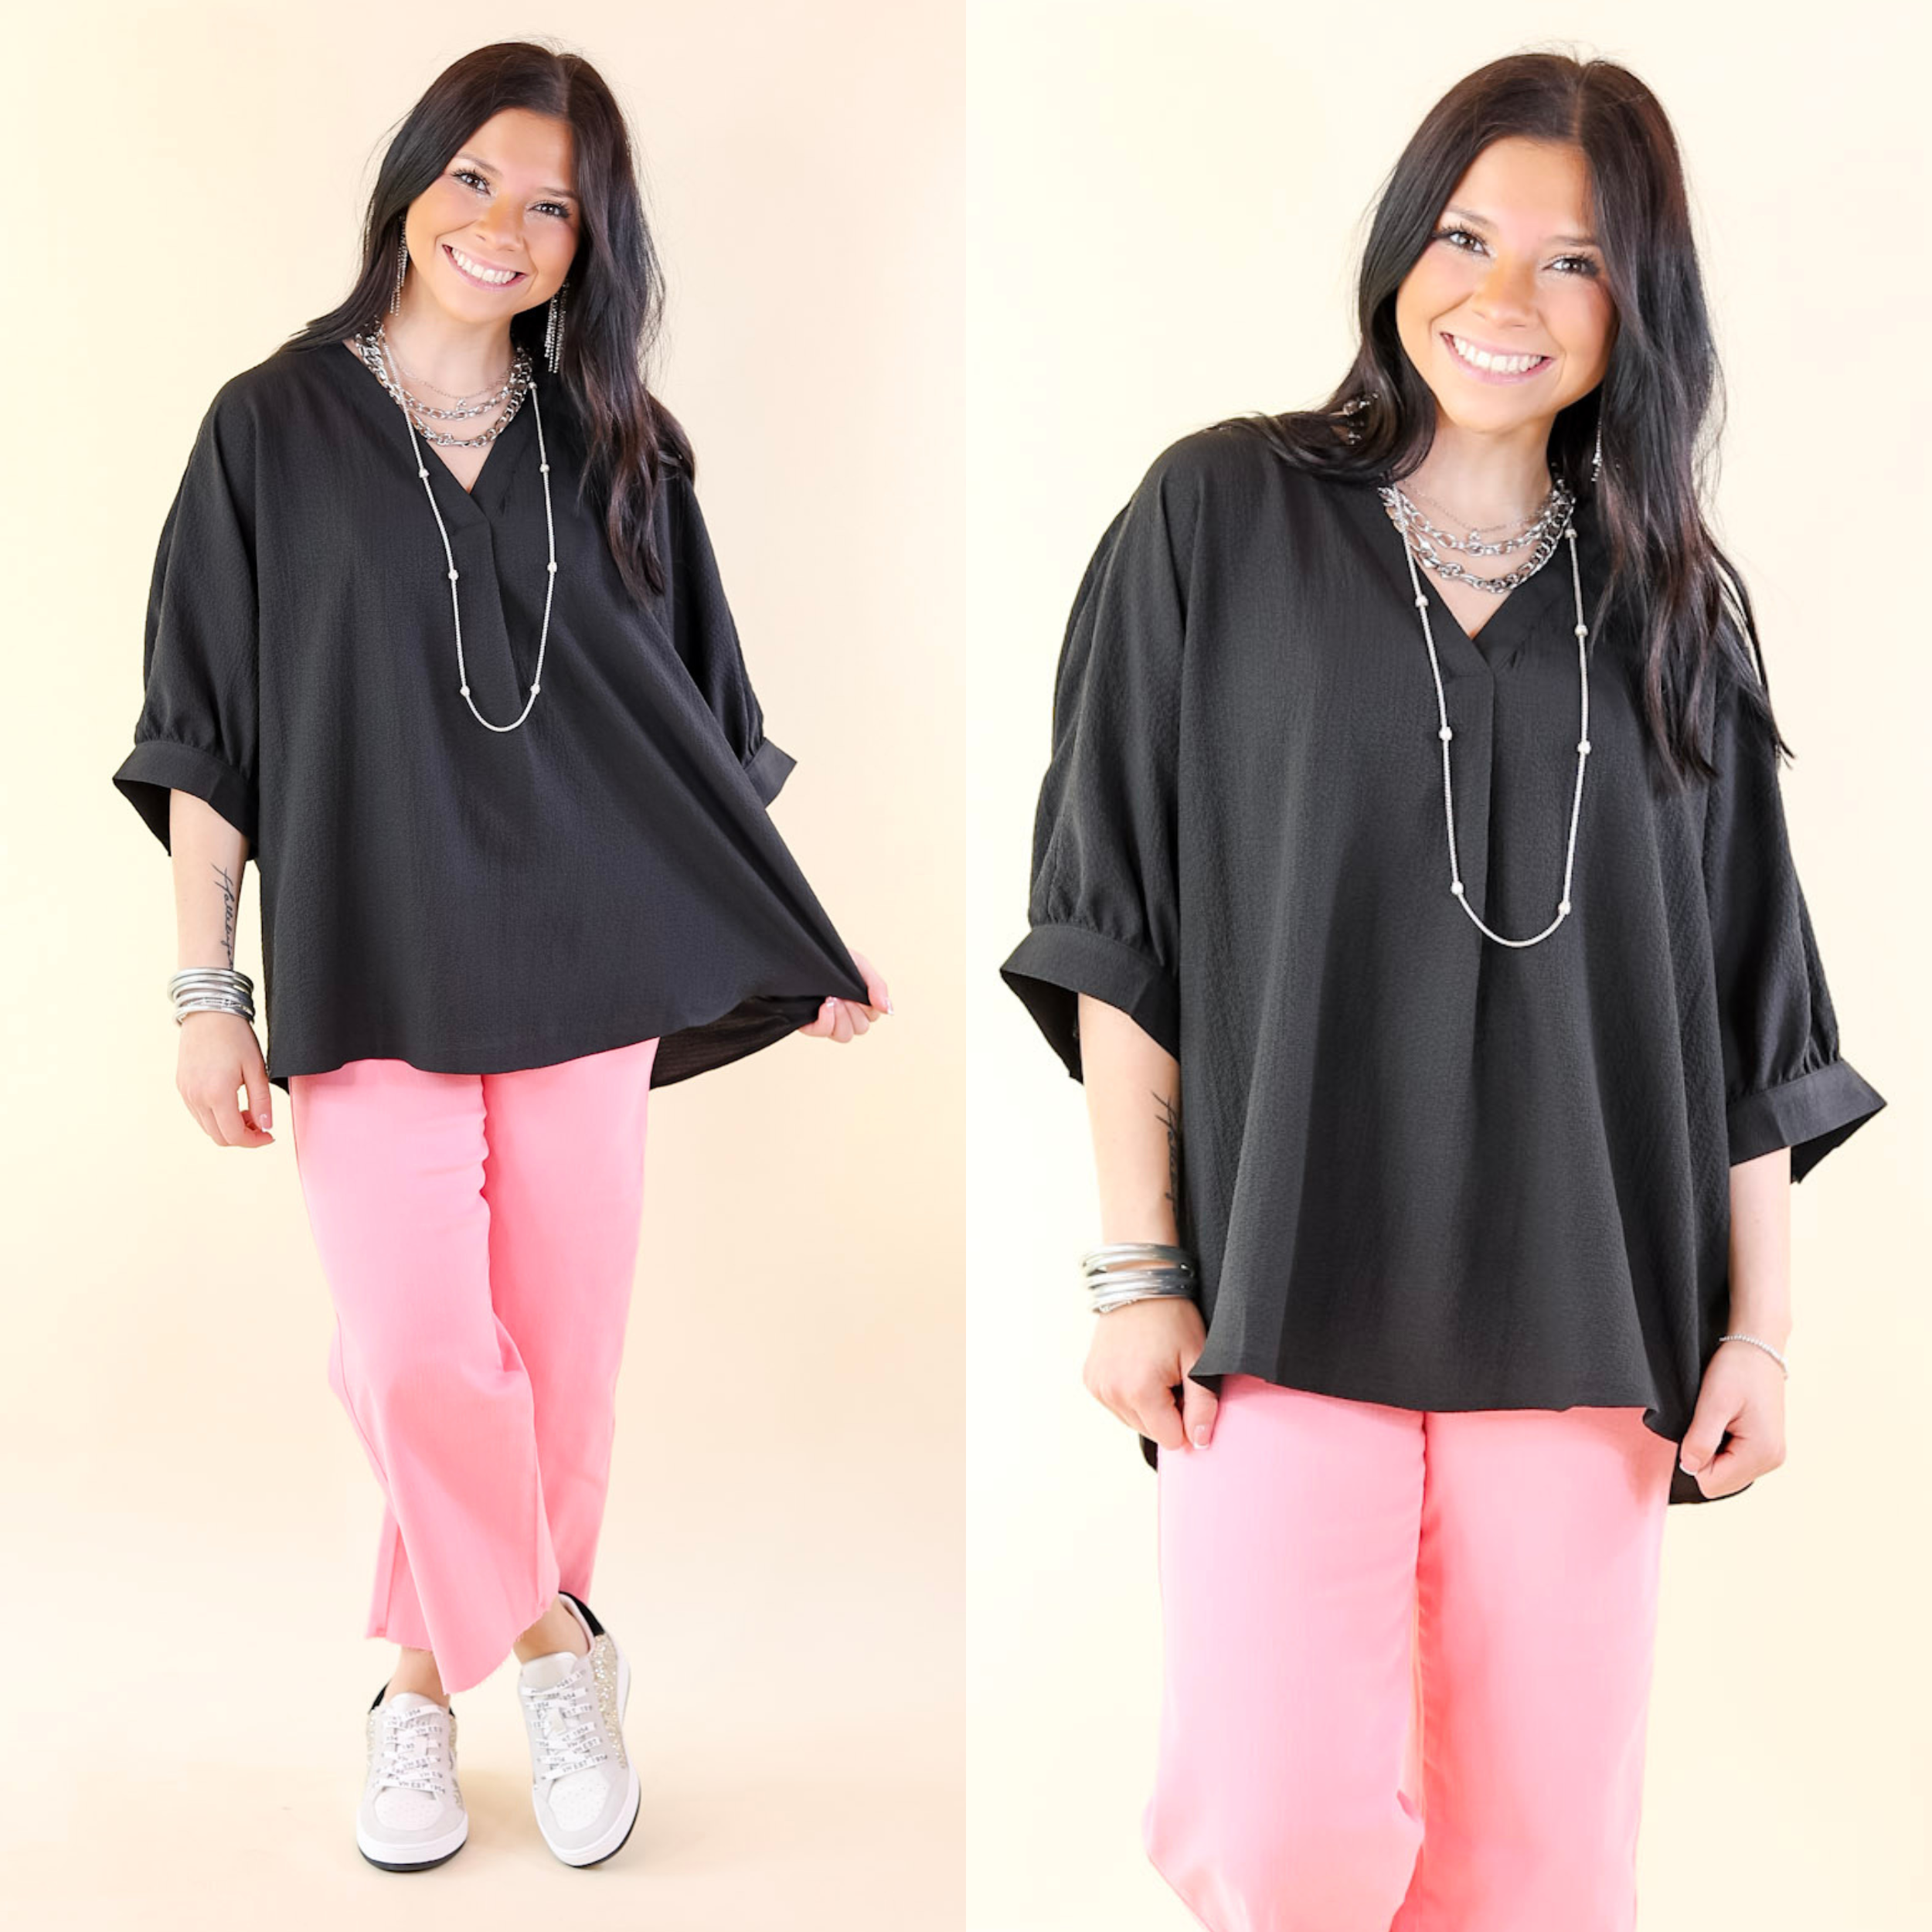 Chic and Charming V Neck Top with 3/4 Sleeves in Black - Giddy Up Glamour Boutique